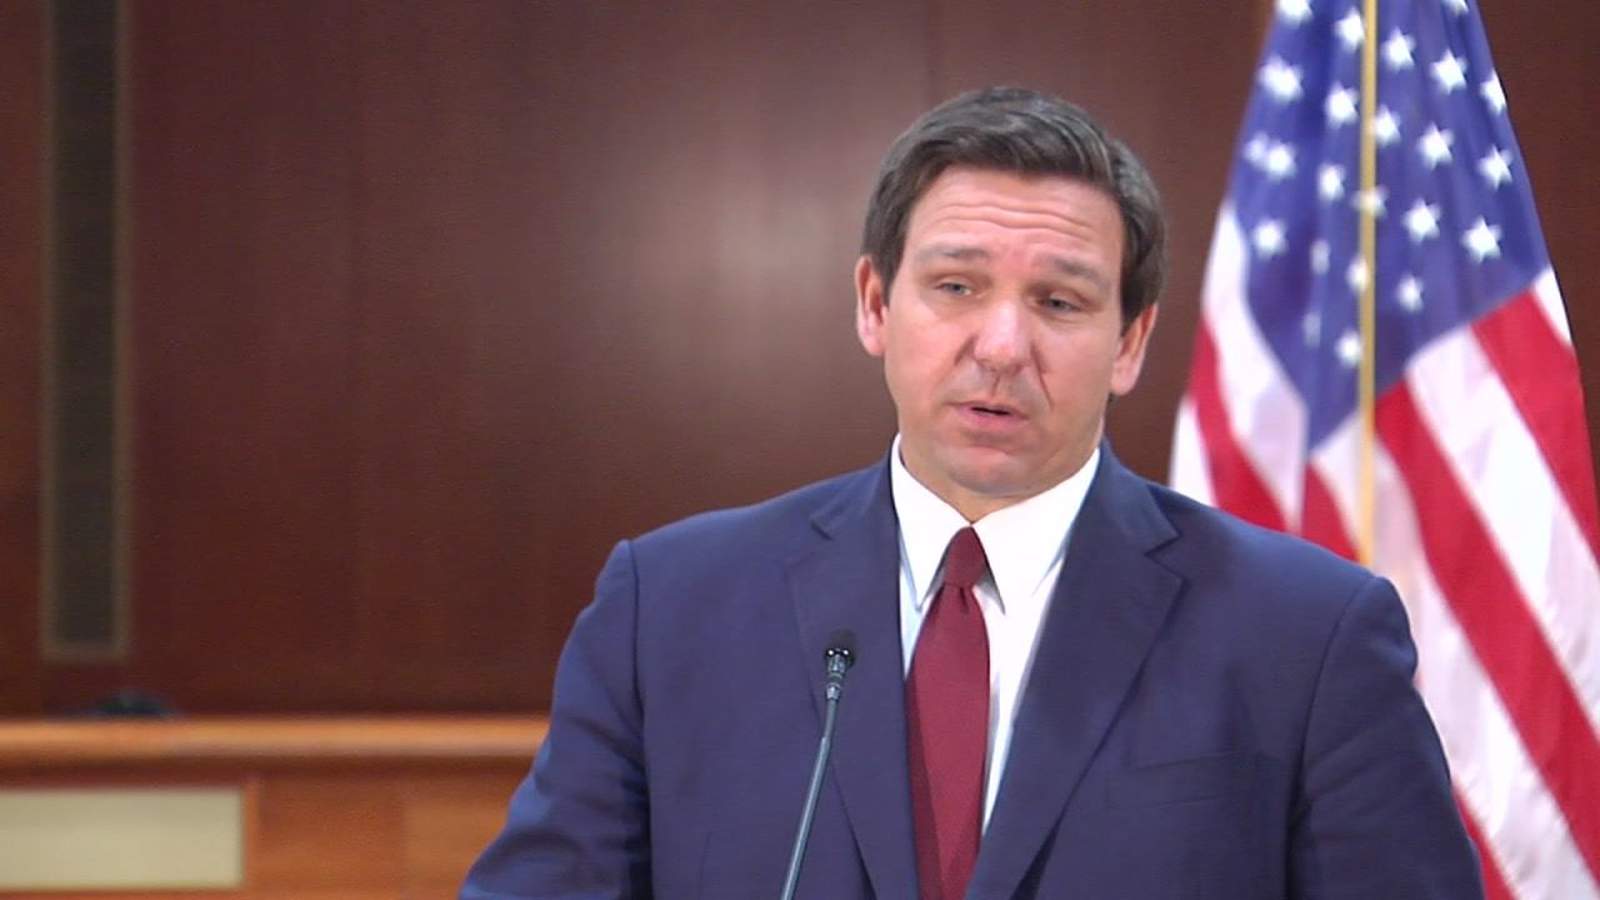 WATCH LIVE: Gov. Ron DeSantis holds news conference in Venice